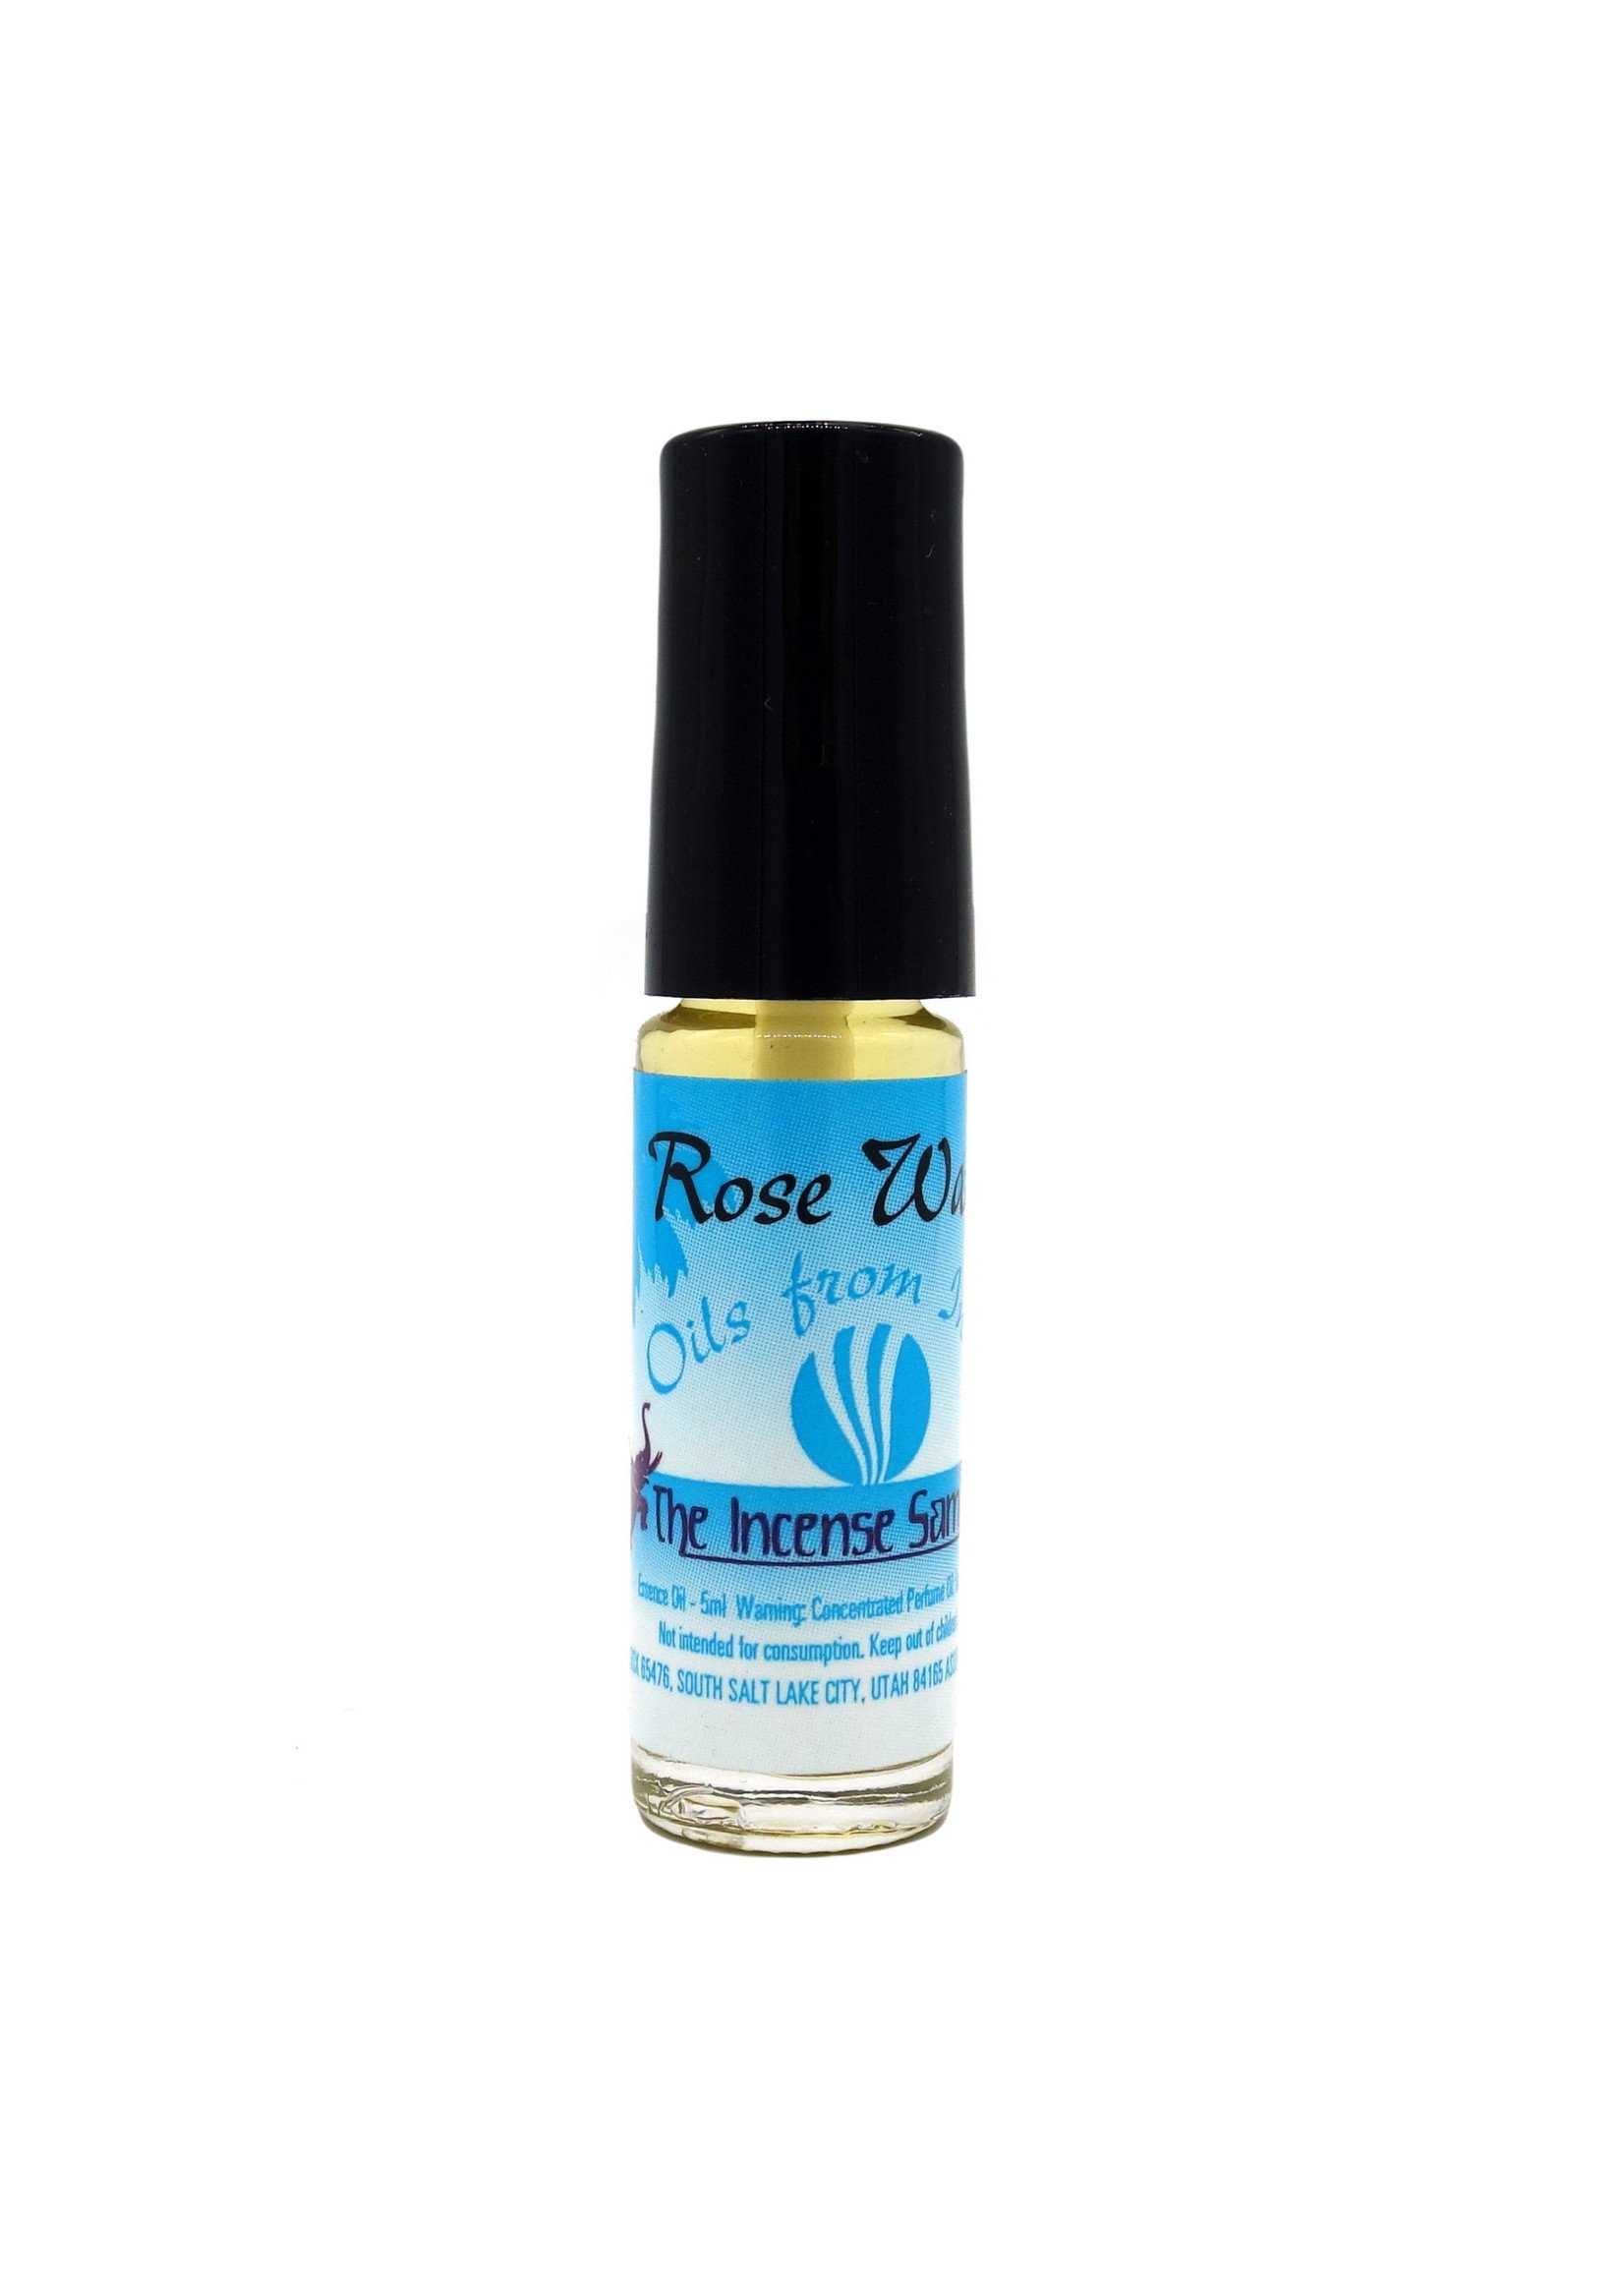 Oils From India Rose Water Perfume Oil 5ml